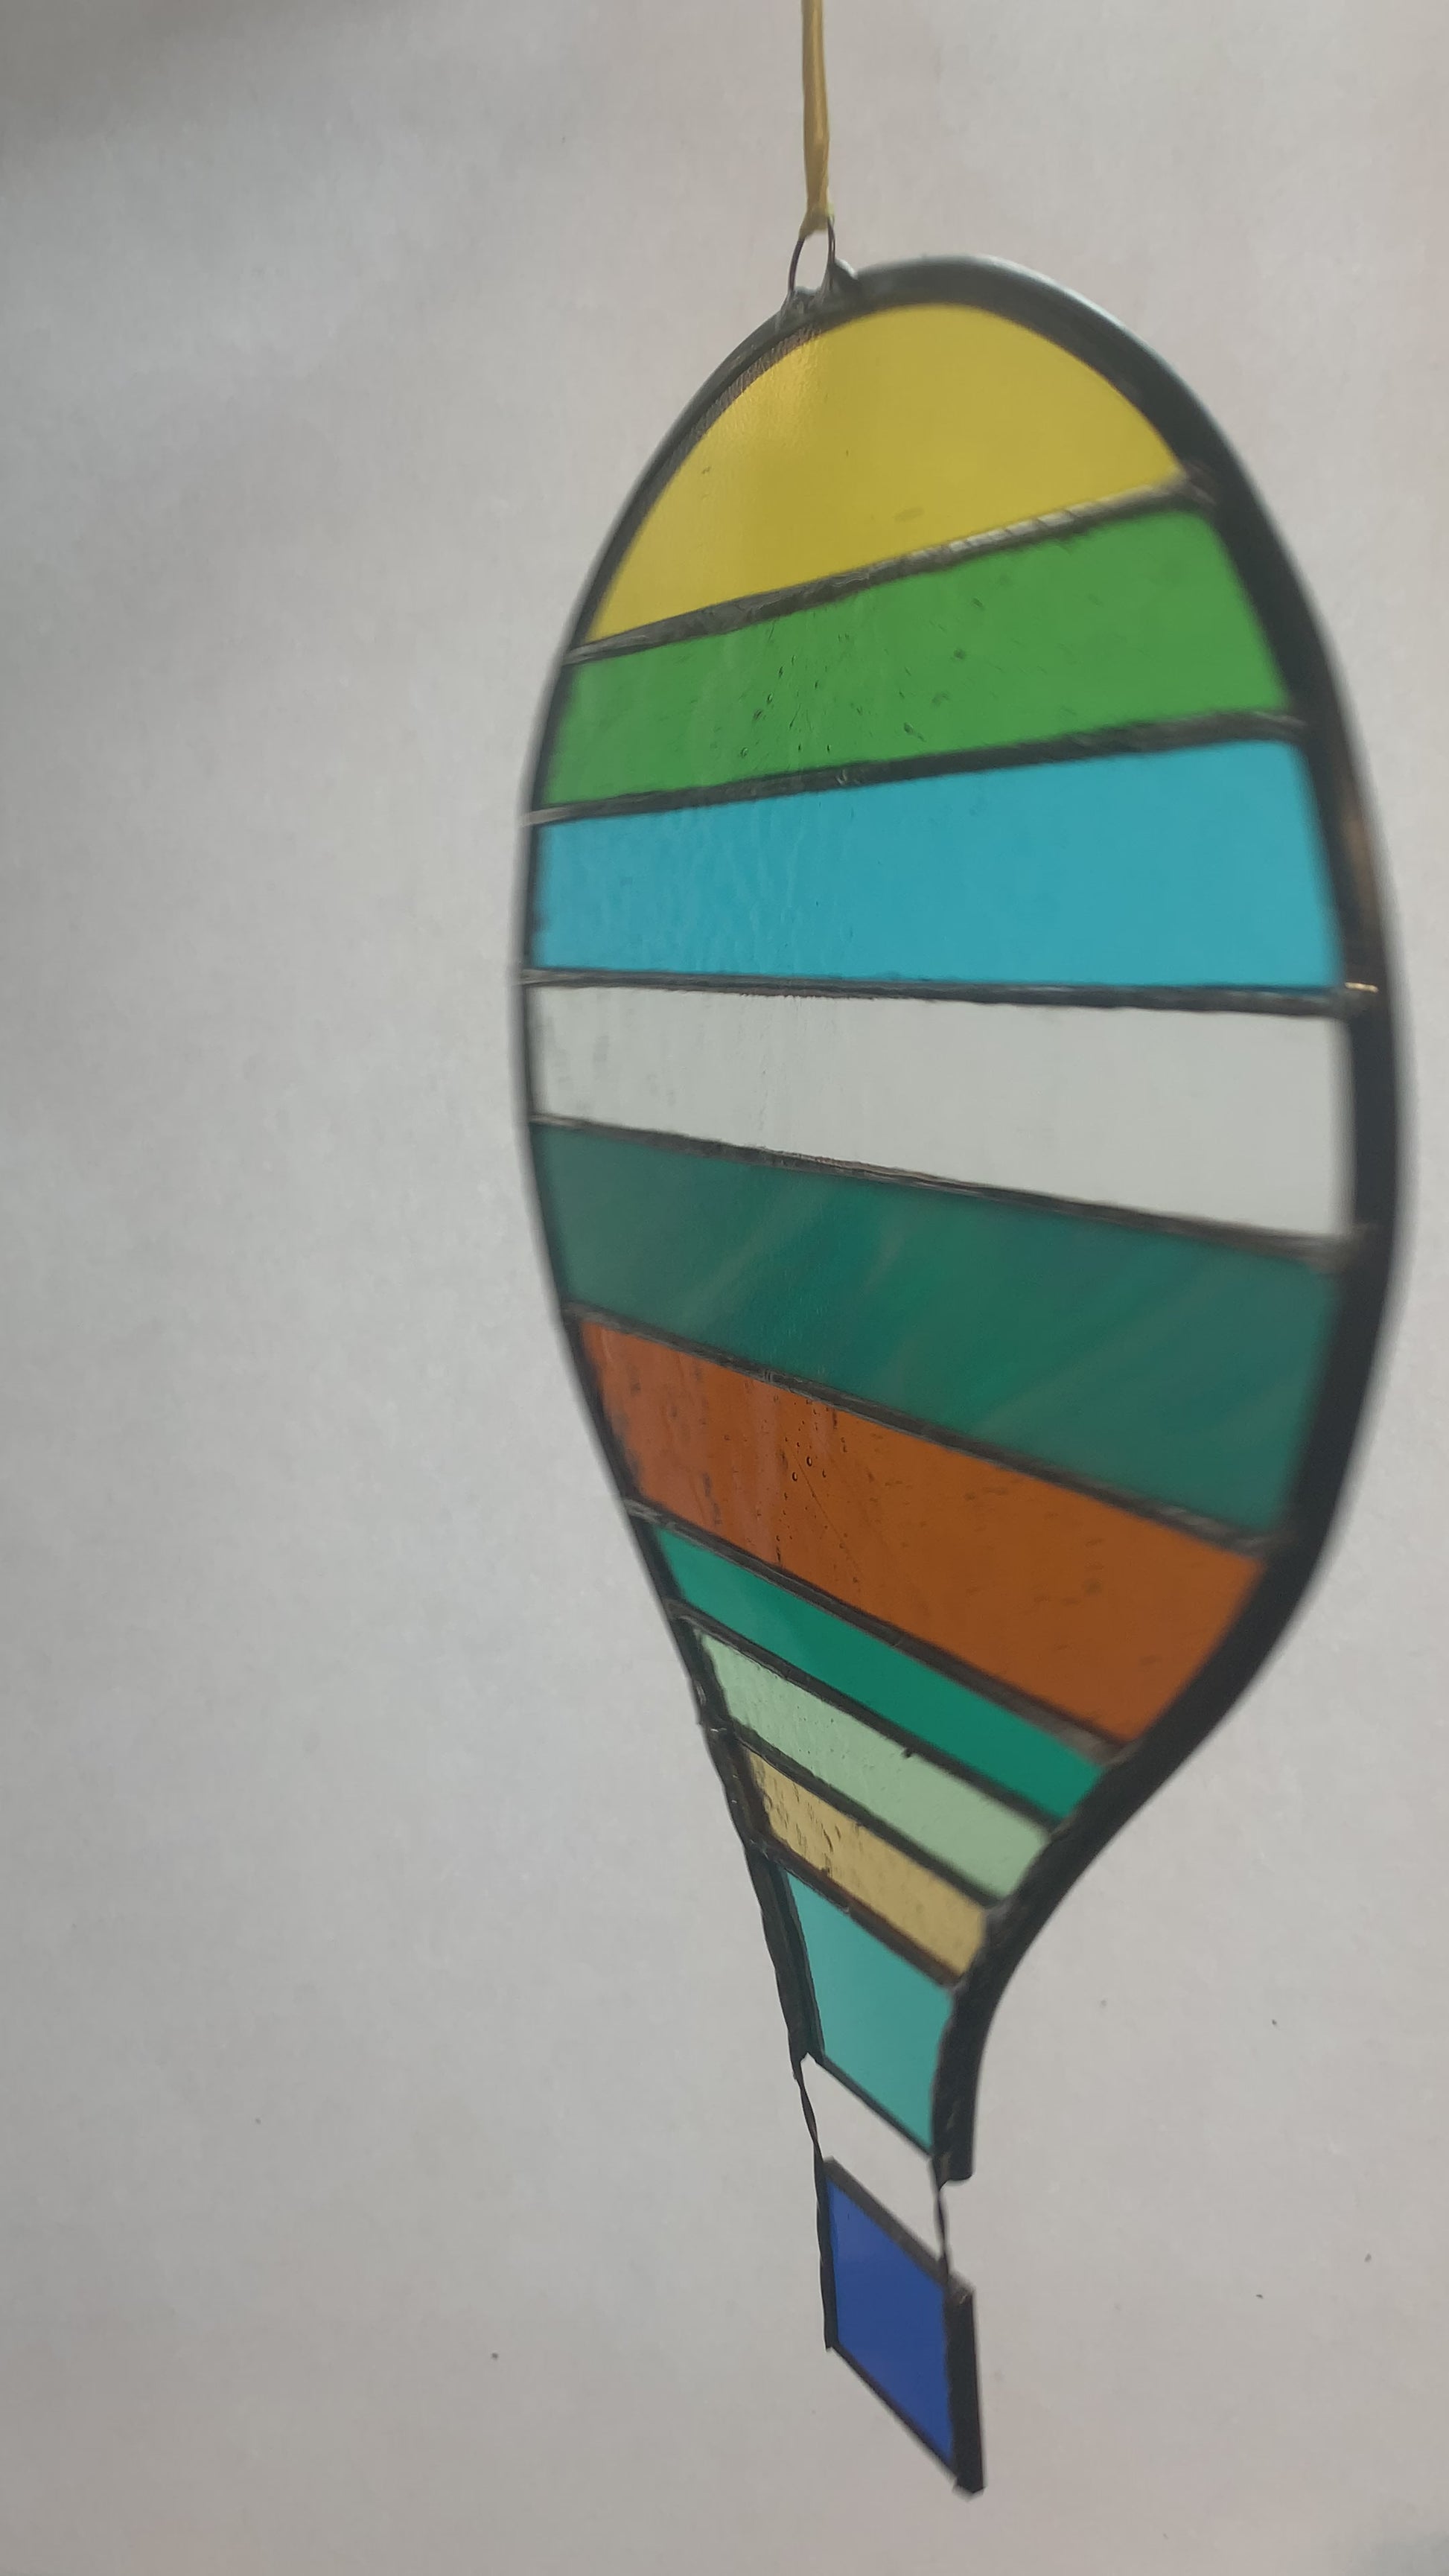 Stained glass hot air balloon suncatcher with stripes.